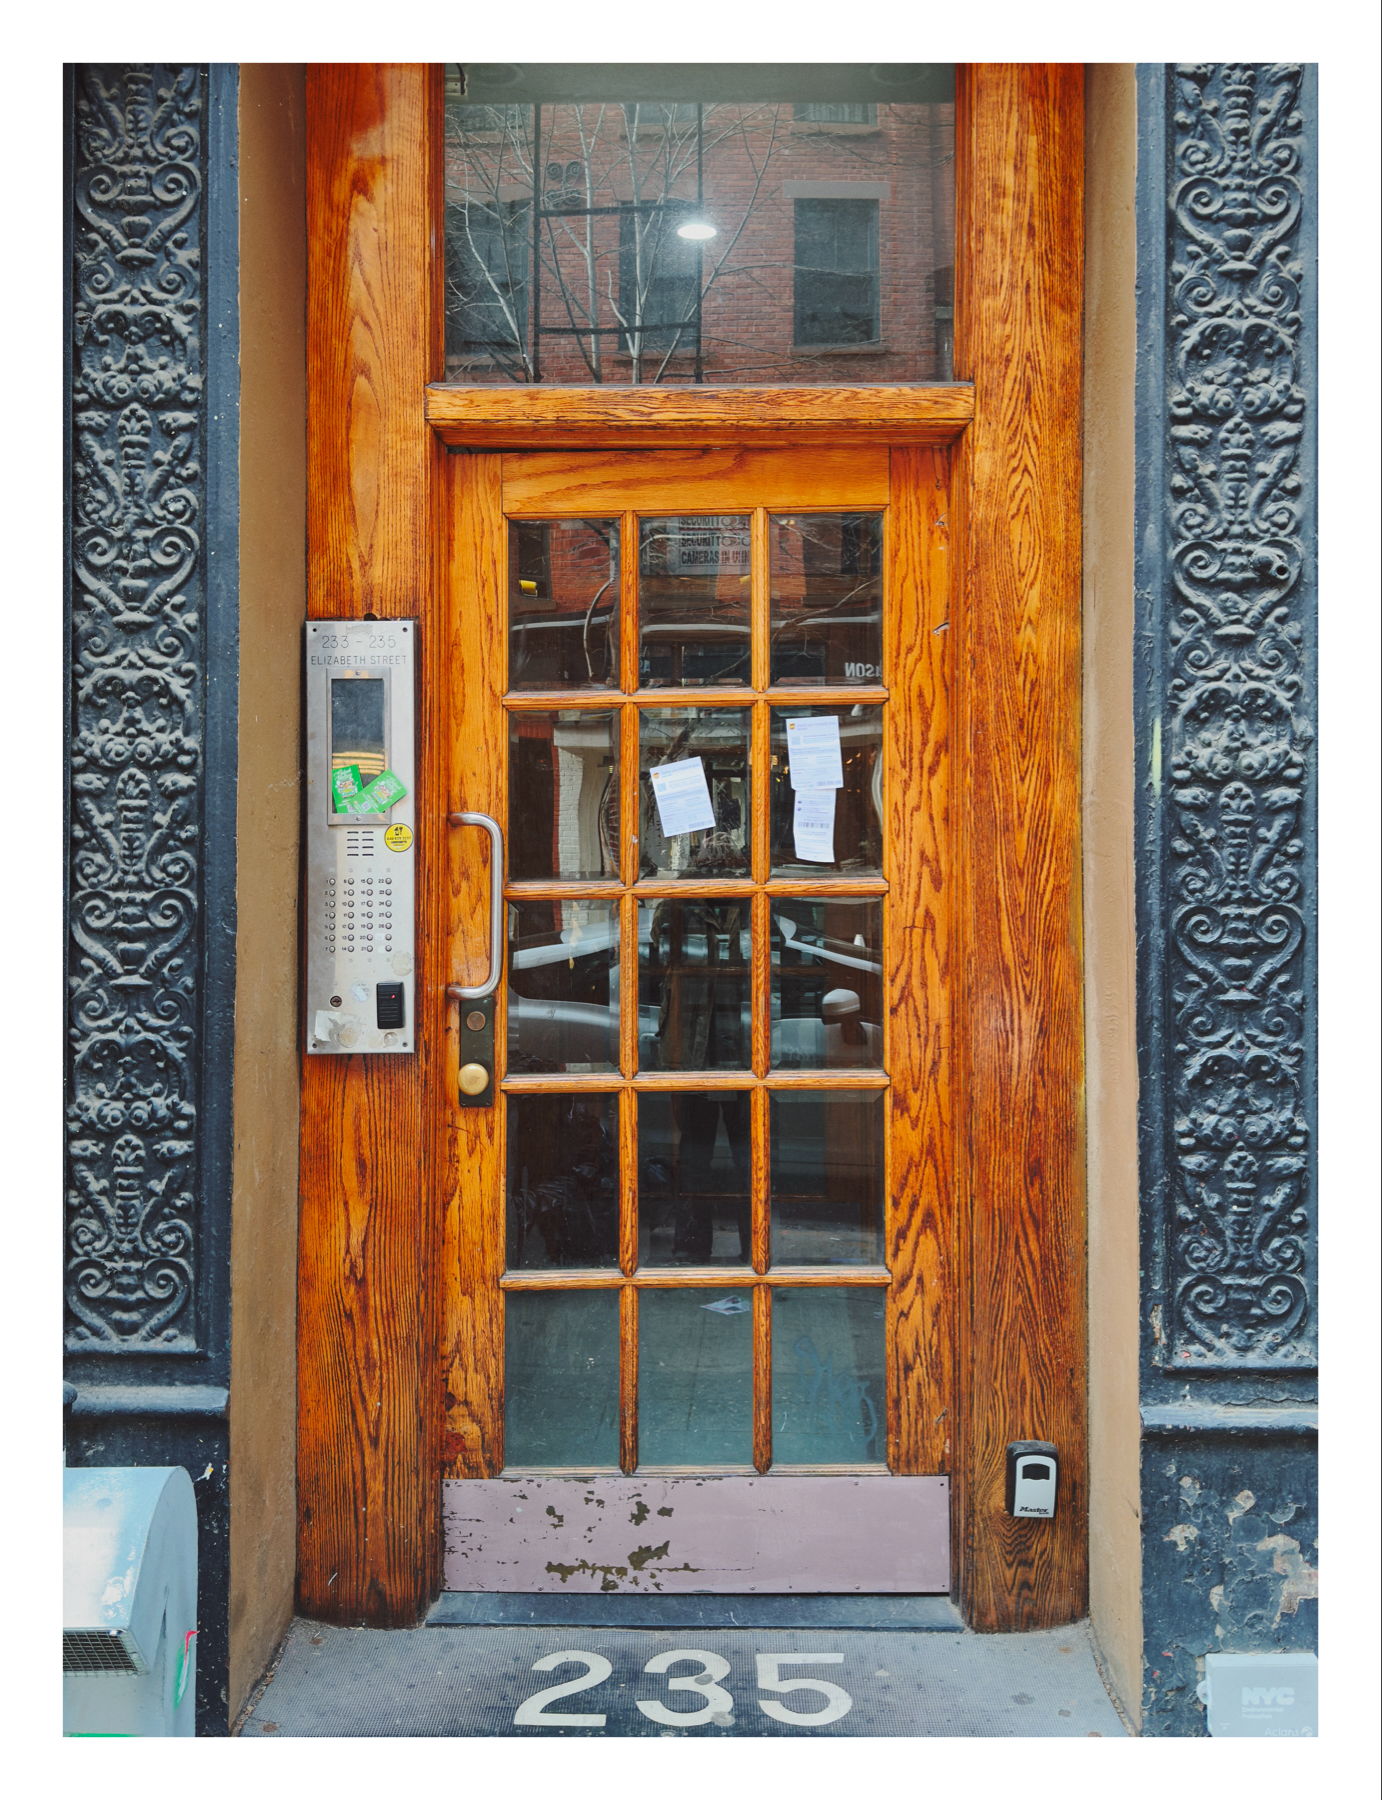 A wooden door with glass panes, framed by ornate metalwork, marked with the number 235. An intercom and buzzers are on the left, a small white device is to the right, and notices are attached to the door.